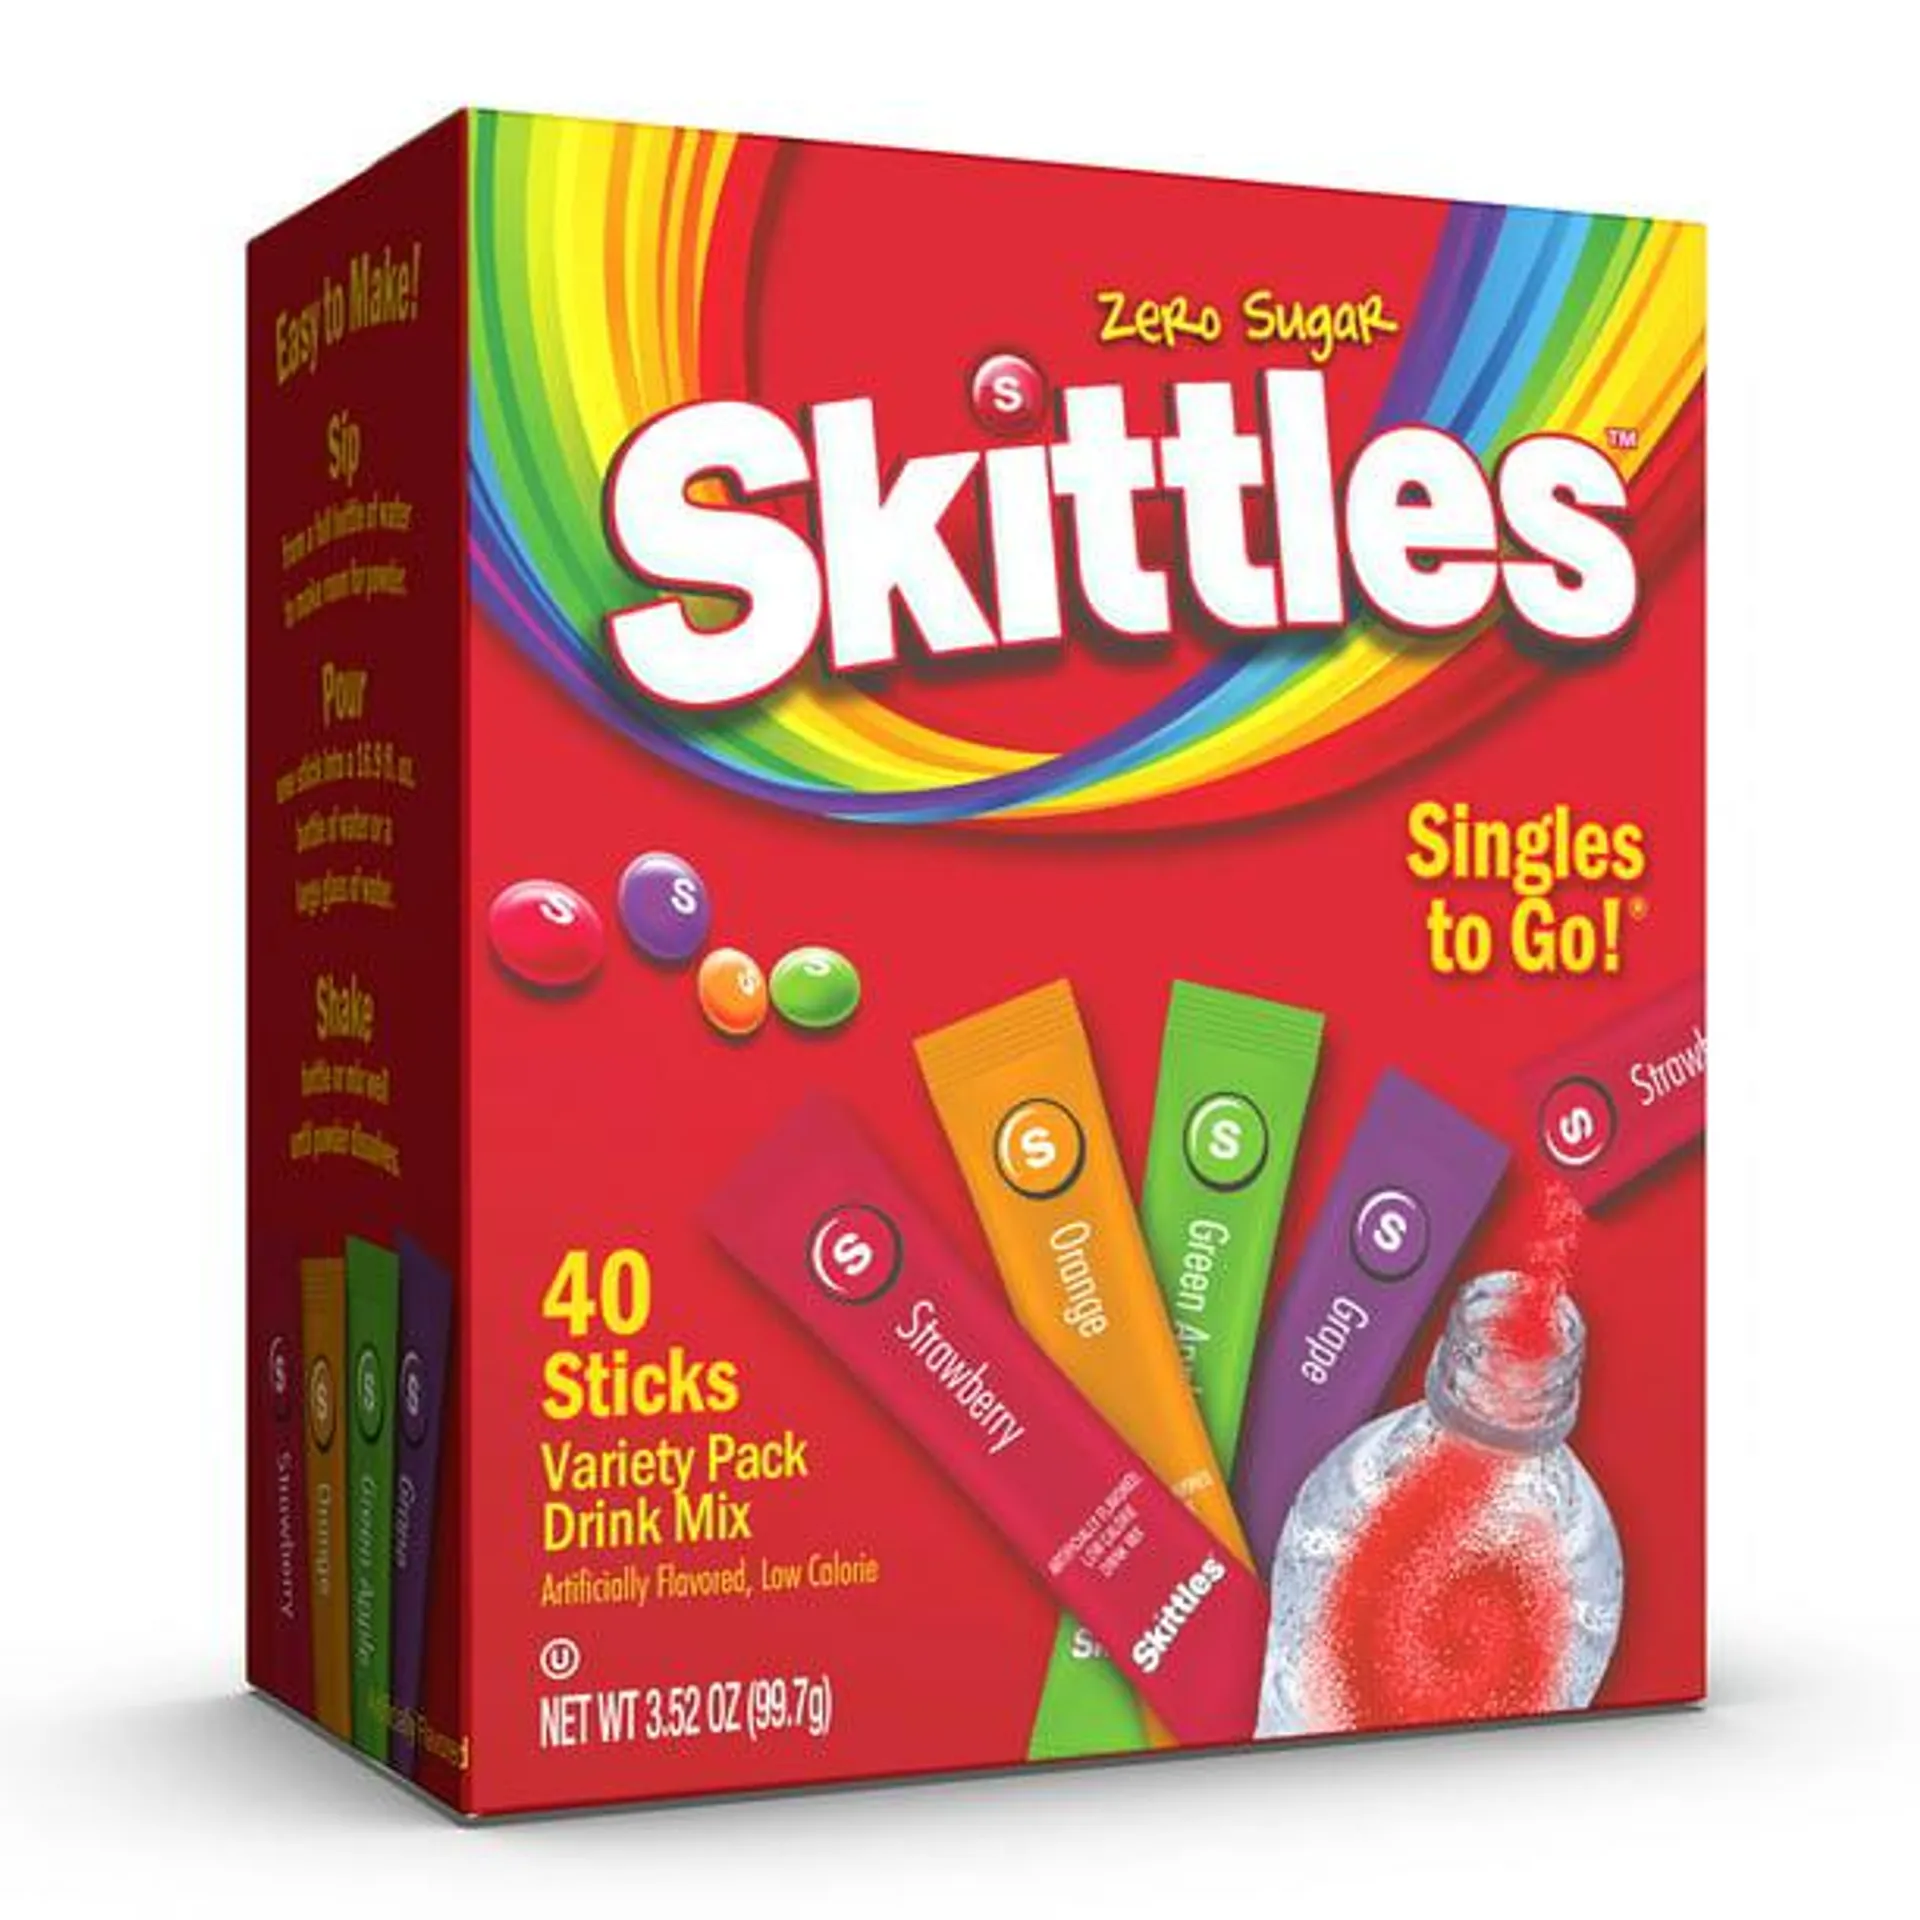 (40 Packets) Skittles Variety Pack Sugar Free, On-The-Go, Caffeine Free, Powdered Drink Mix